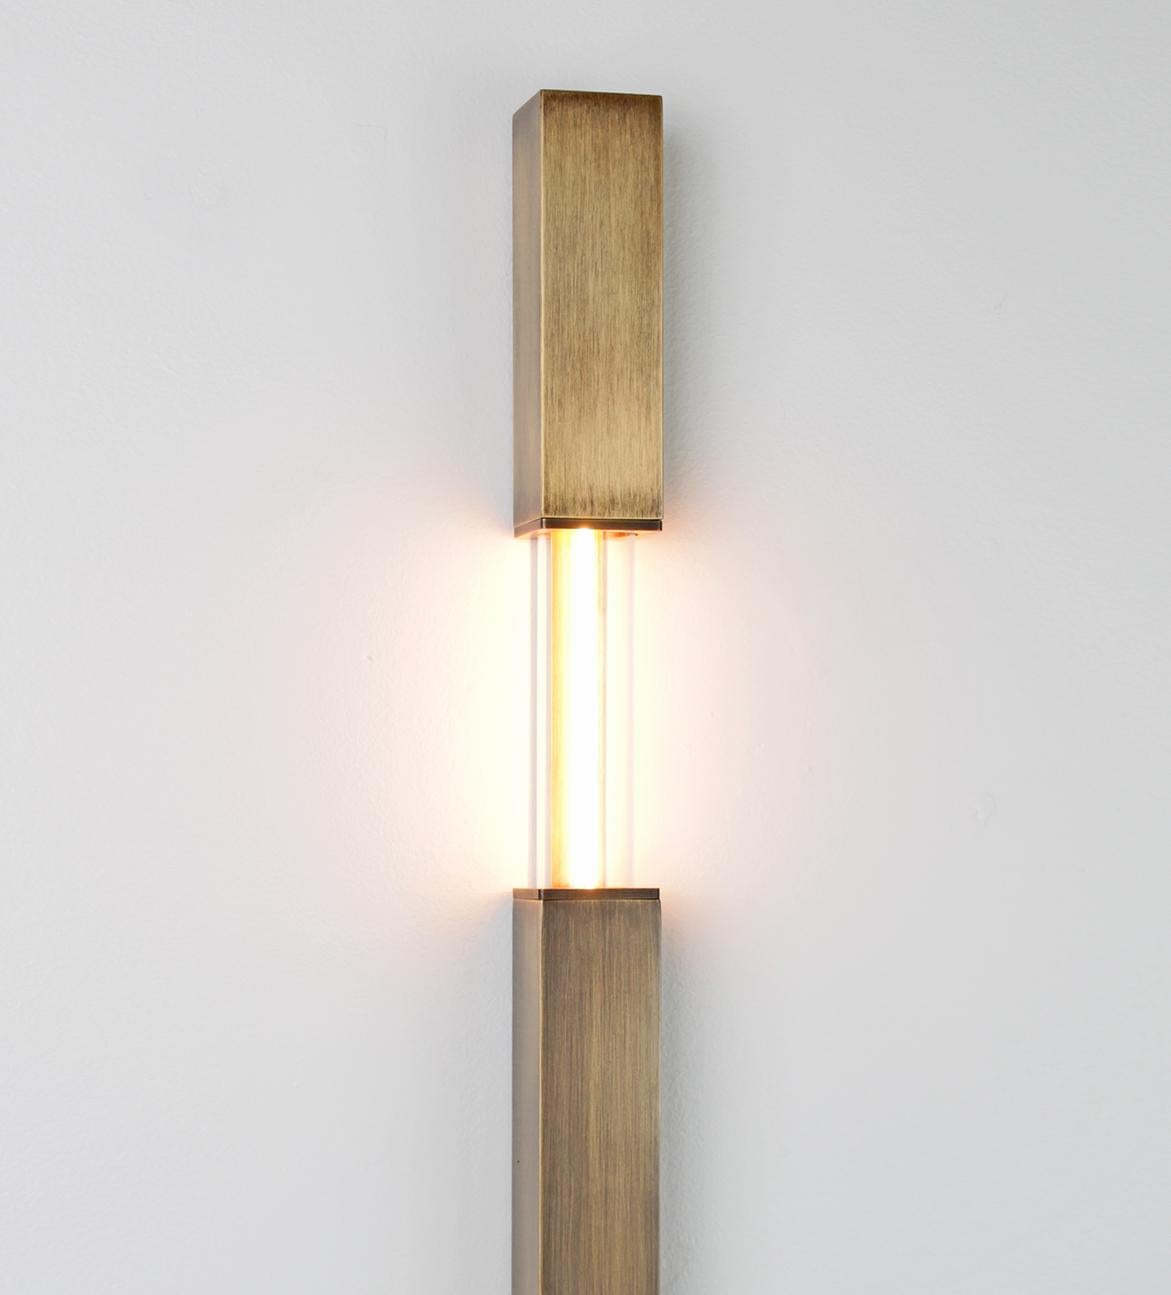 Mini stilk: Our simple and elegant Stilk Daikon is suited to smaller spaces or those in need of subtle illumination. The Stilk is lovely hanging solo on a wall or in multiples where more light or action is needed. 

Surface finish: brushed brass,